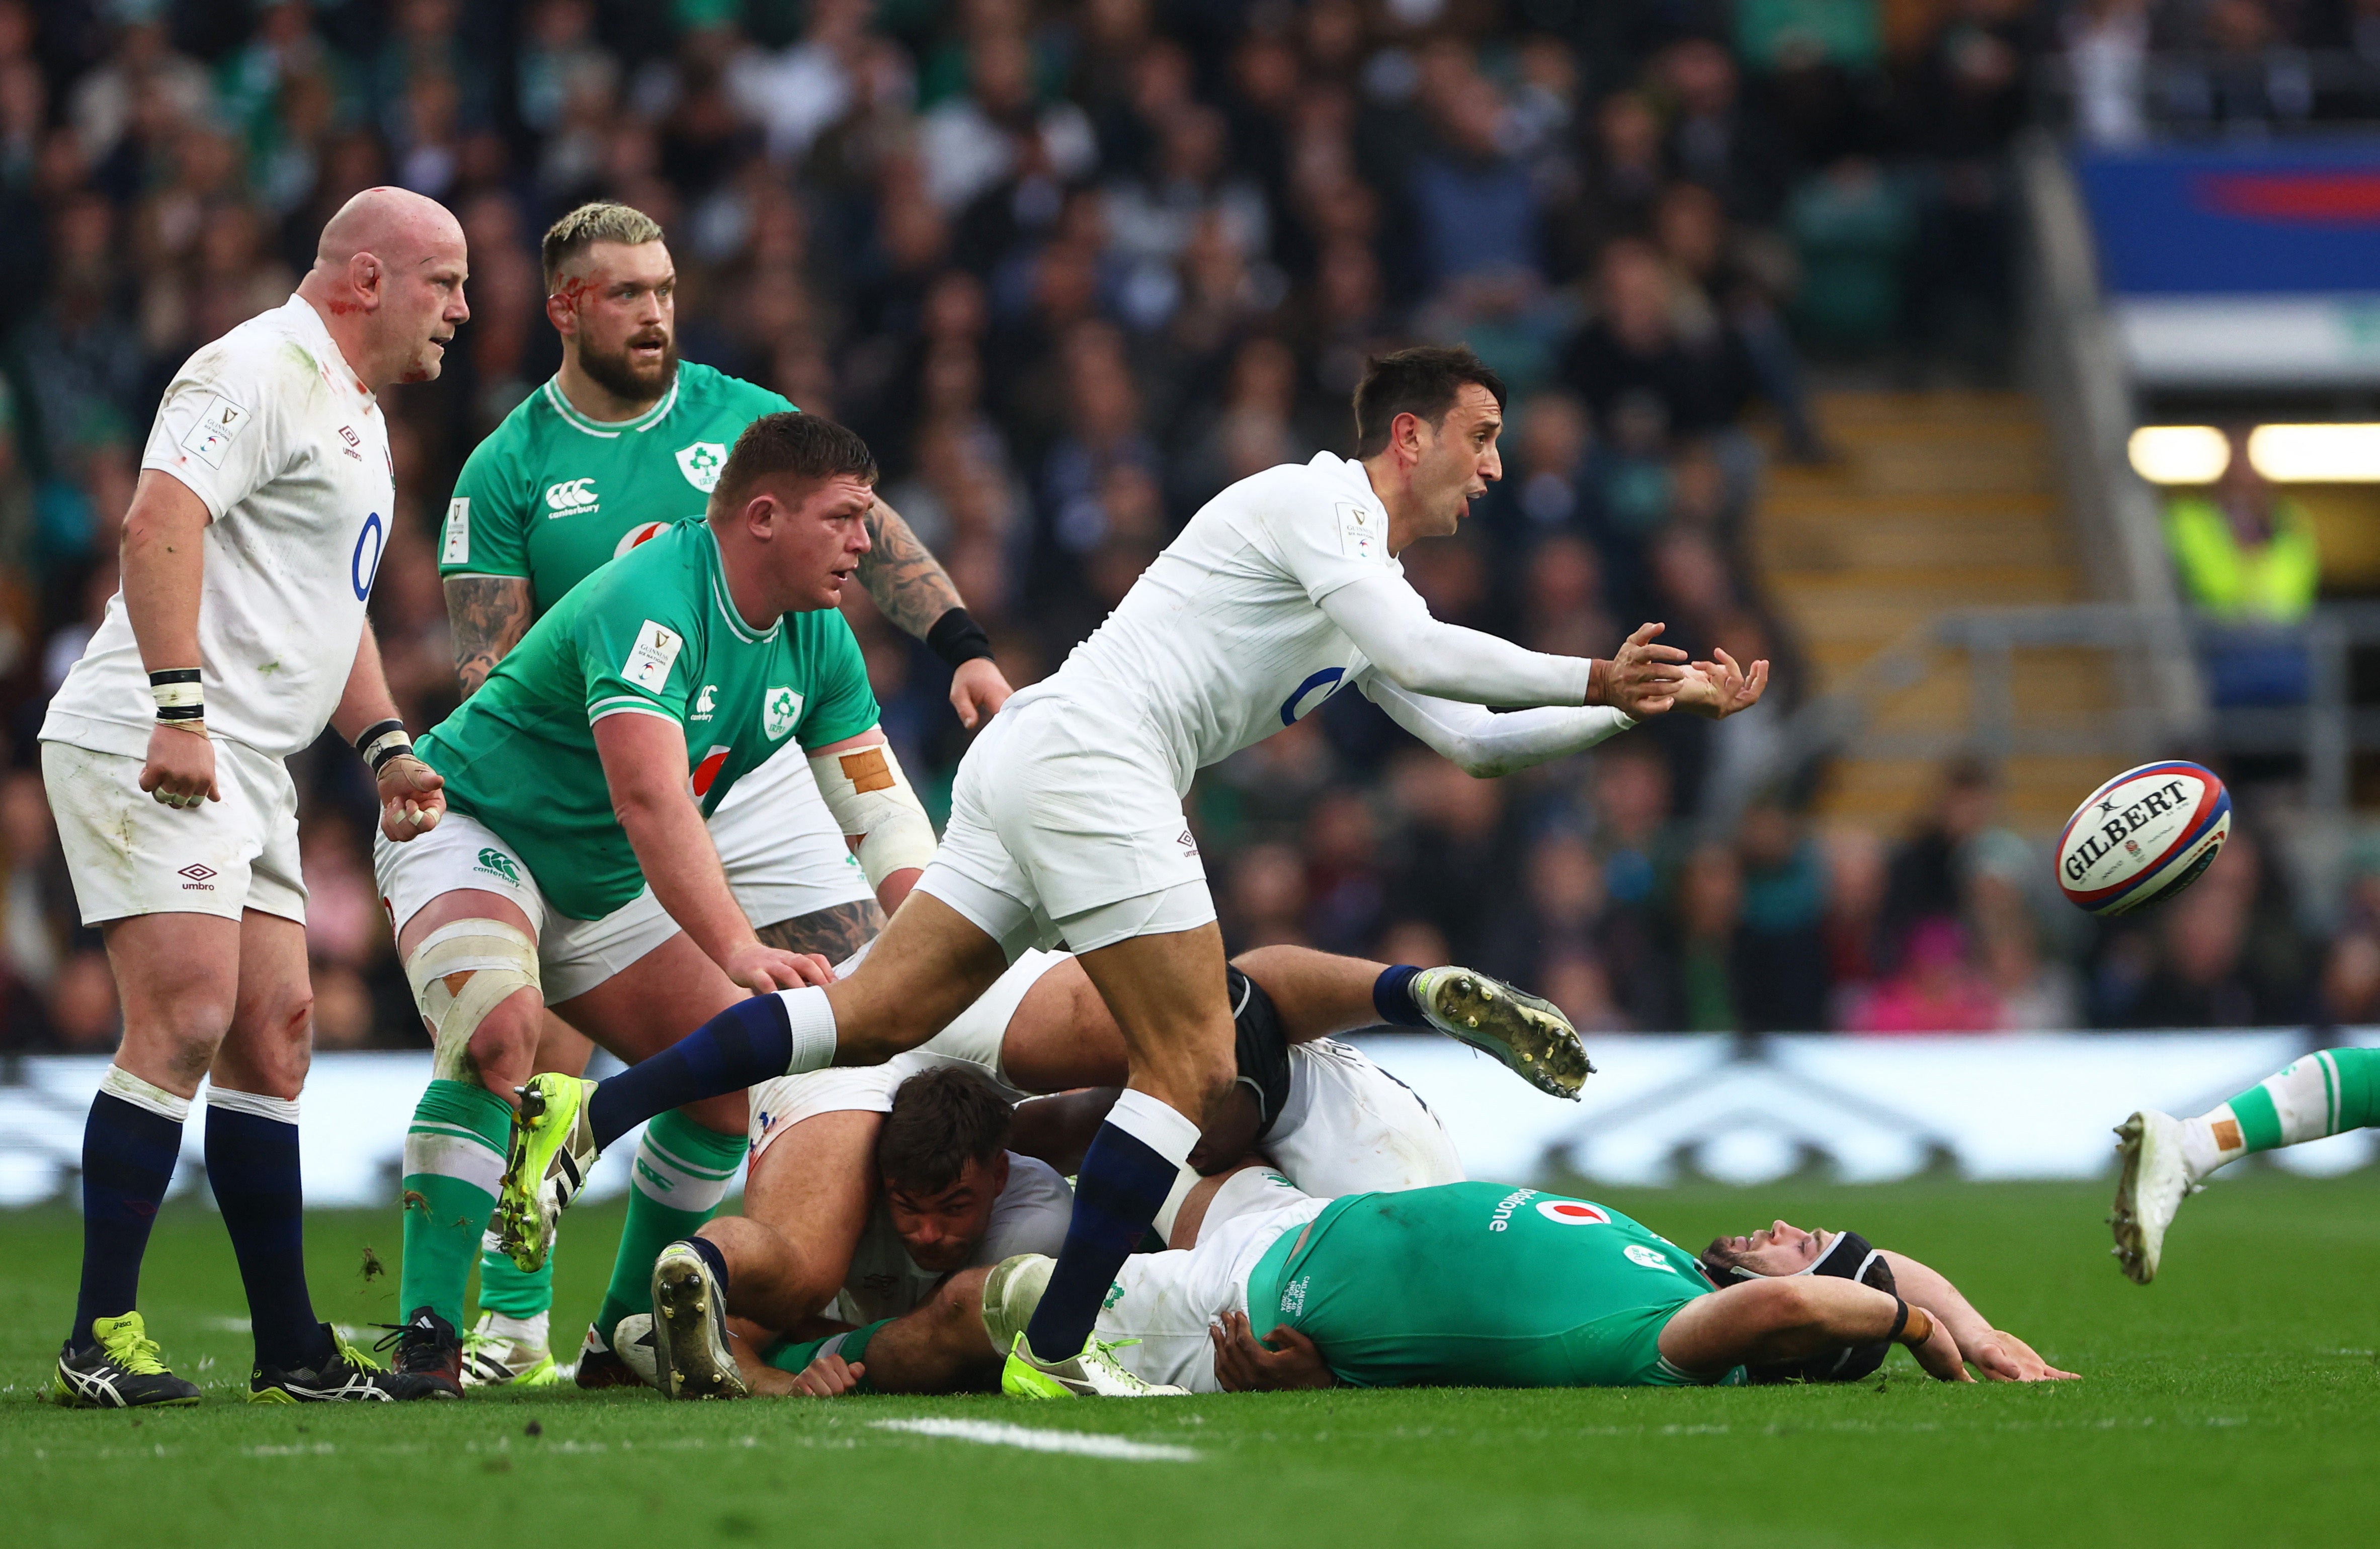 Alex Mitchell directed England’s attack with aplomb at Twickenham